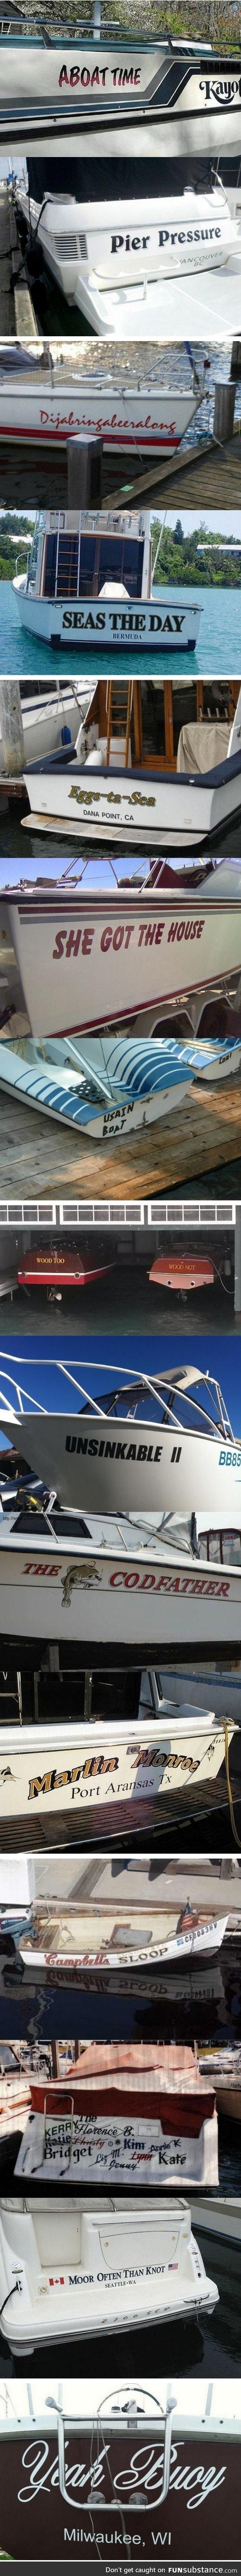 Boats with fairly clever names...